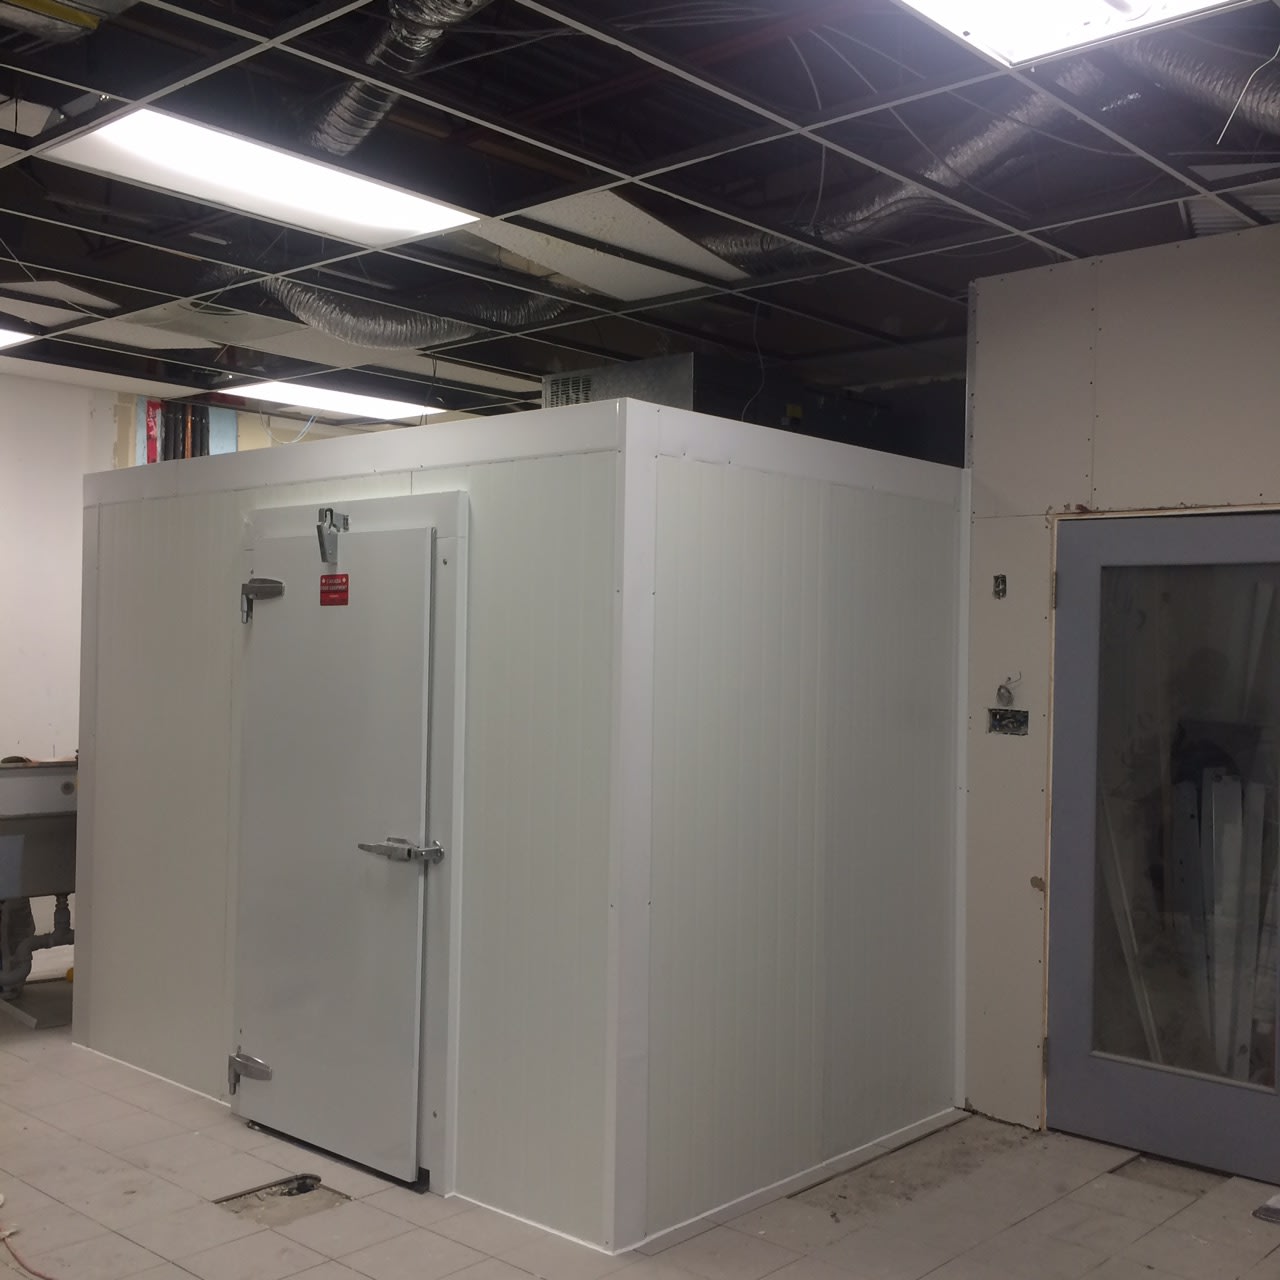 6x8x8H Walk-In Cooler  - Used Self Contained System (NEW SD) - C688SDUSC